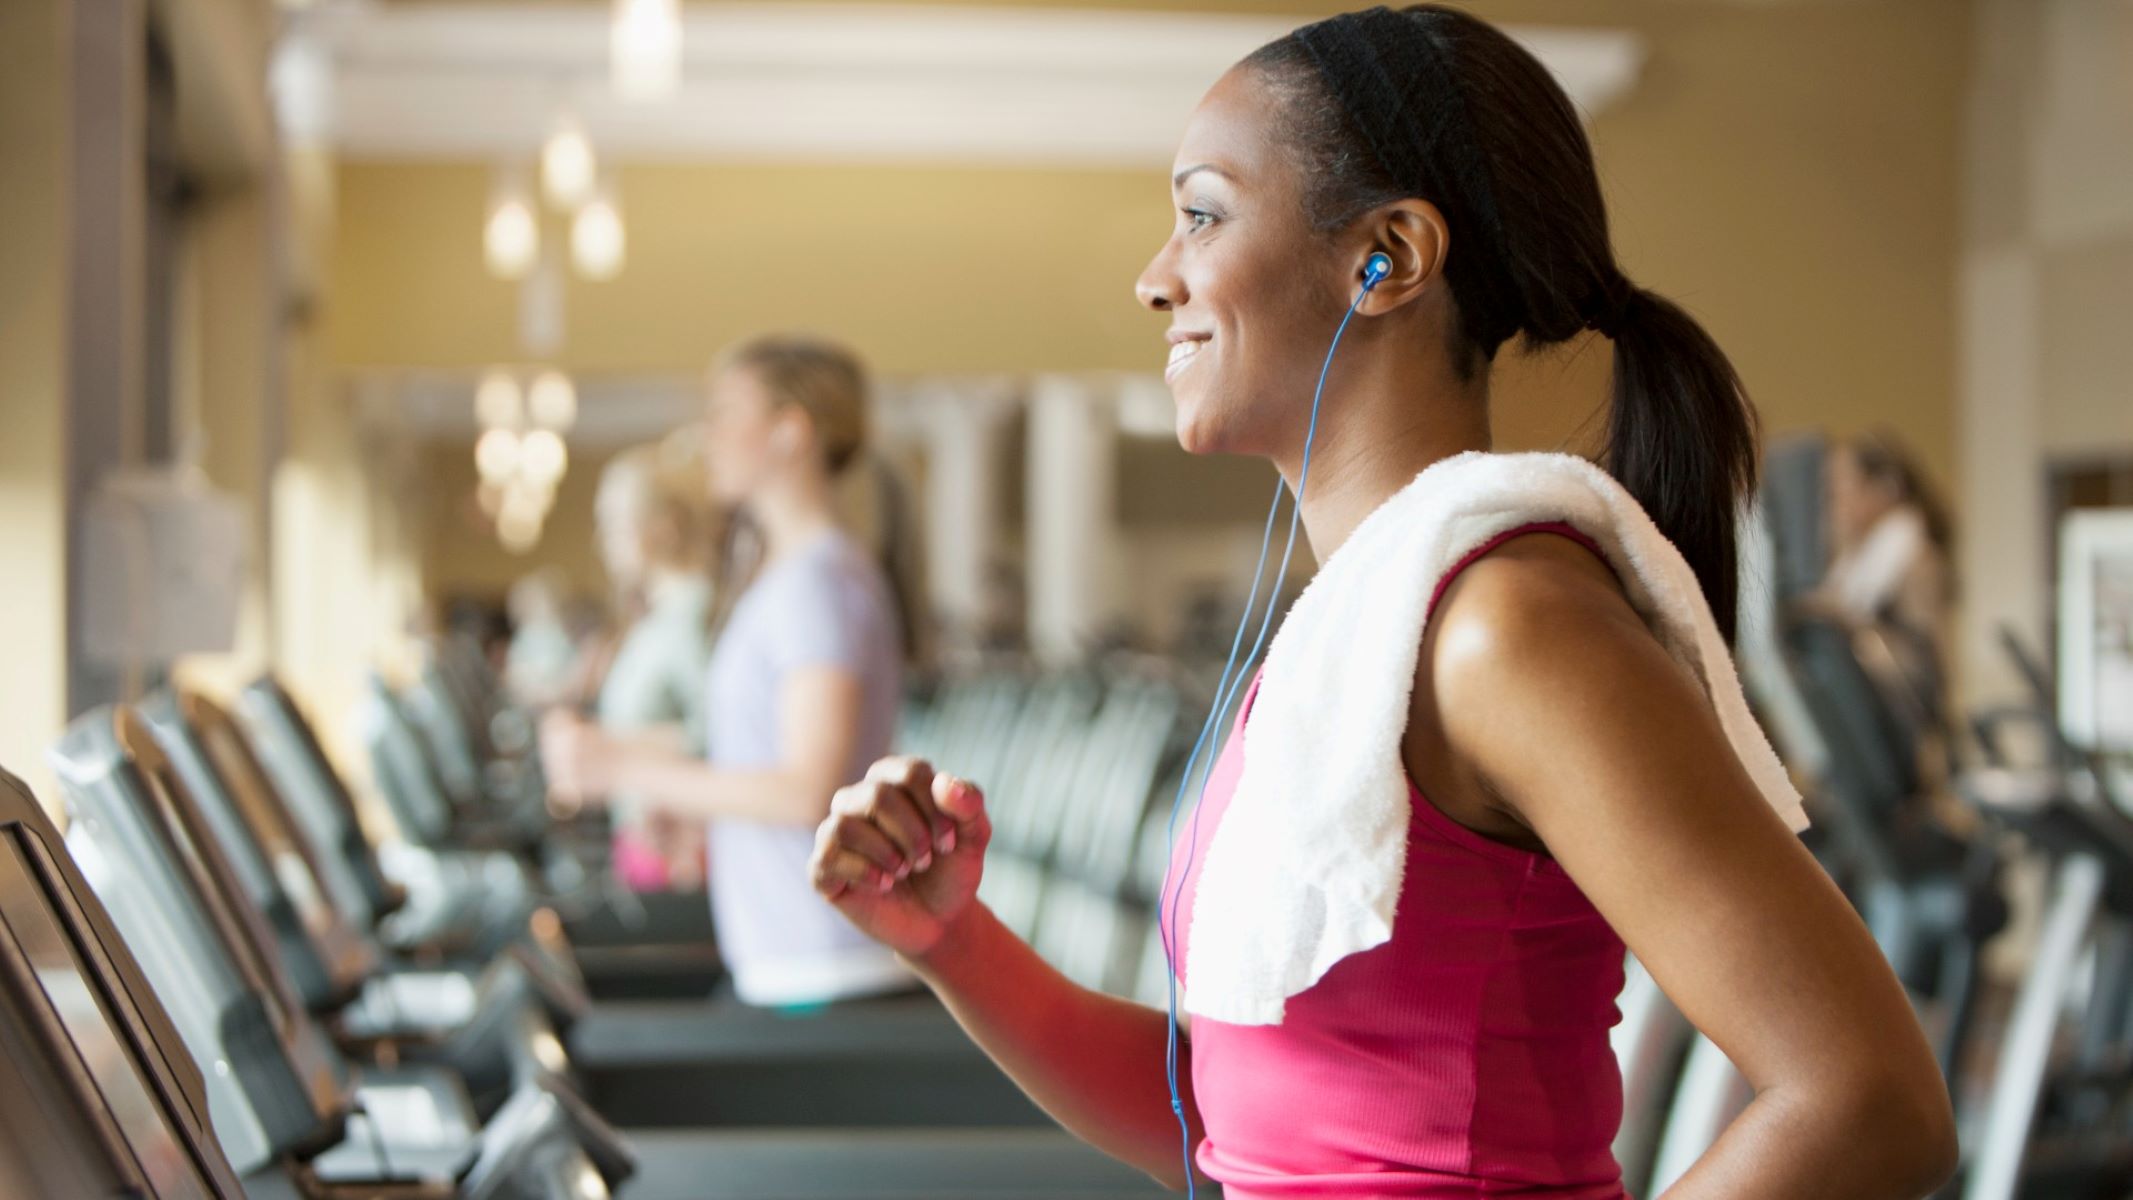 What To Do On The Treadmill